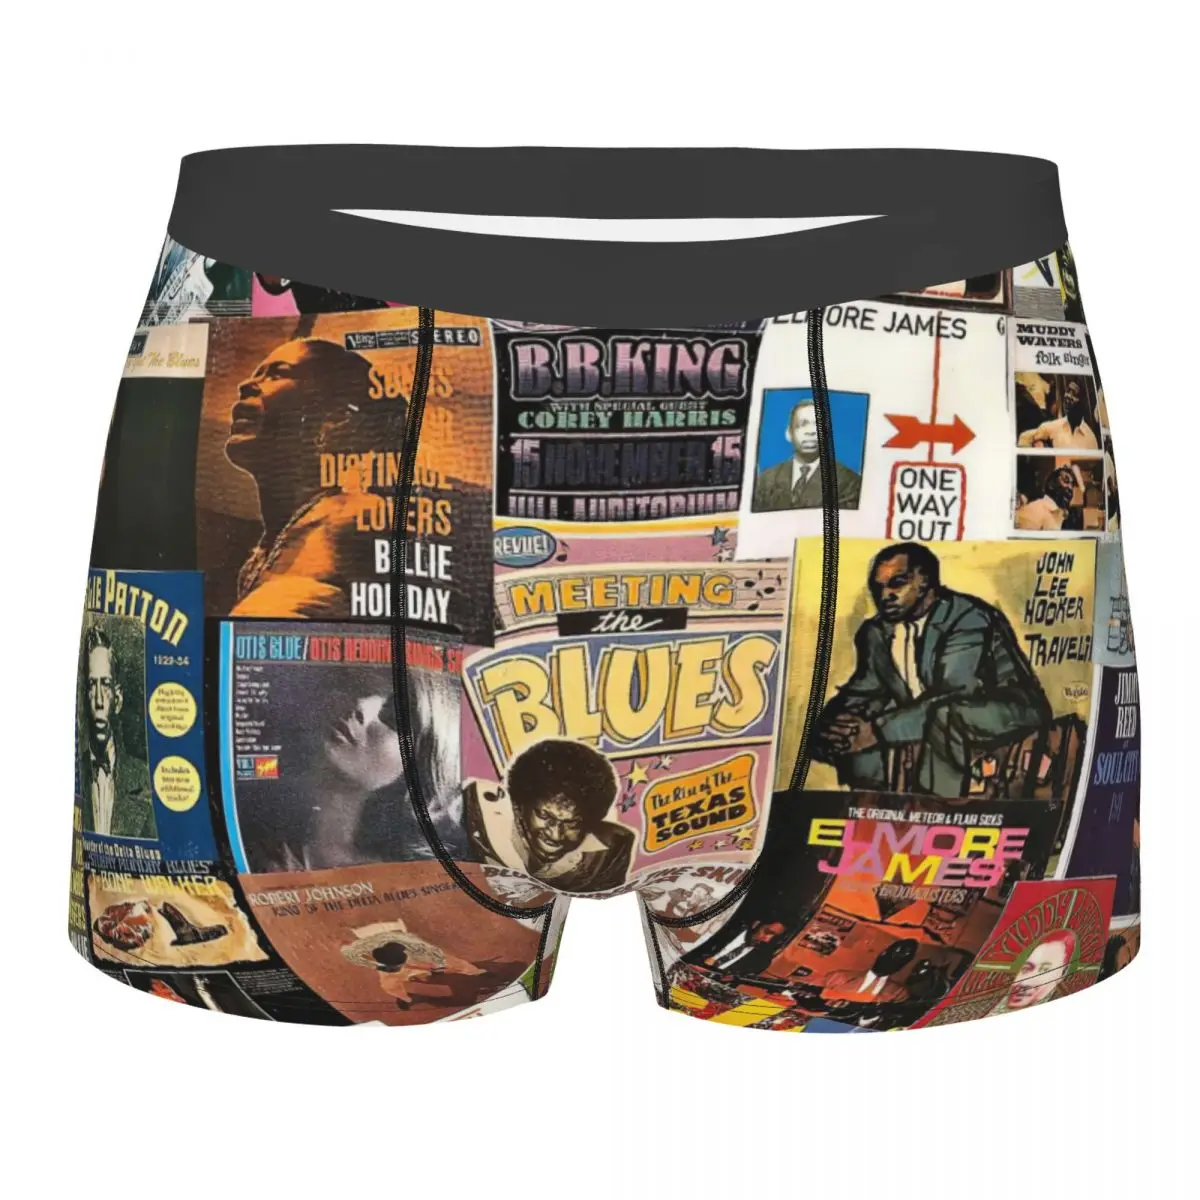 Blues Music Collage Underpants Breathbale Panties Male Underwear Print Shorts Boxer Briefs usb midi cable adapter usb type a male to midi din 5 pin in out cable interface with led indicator for music keyboard